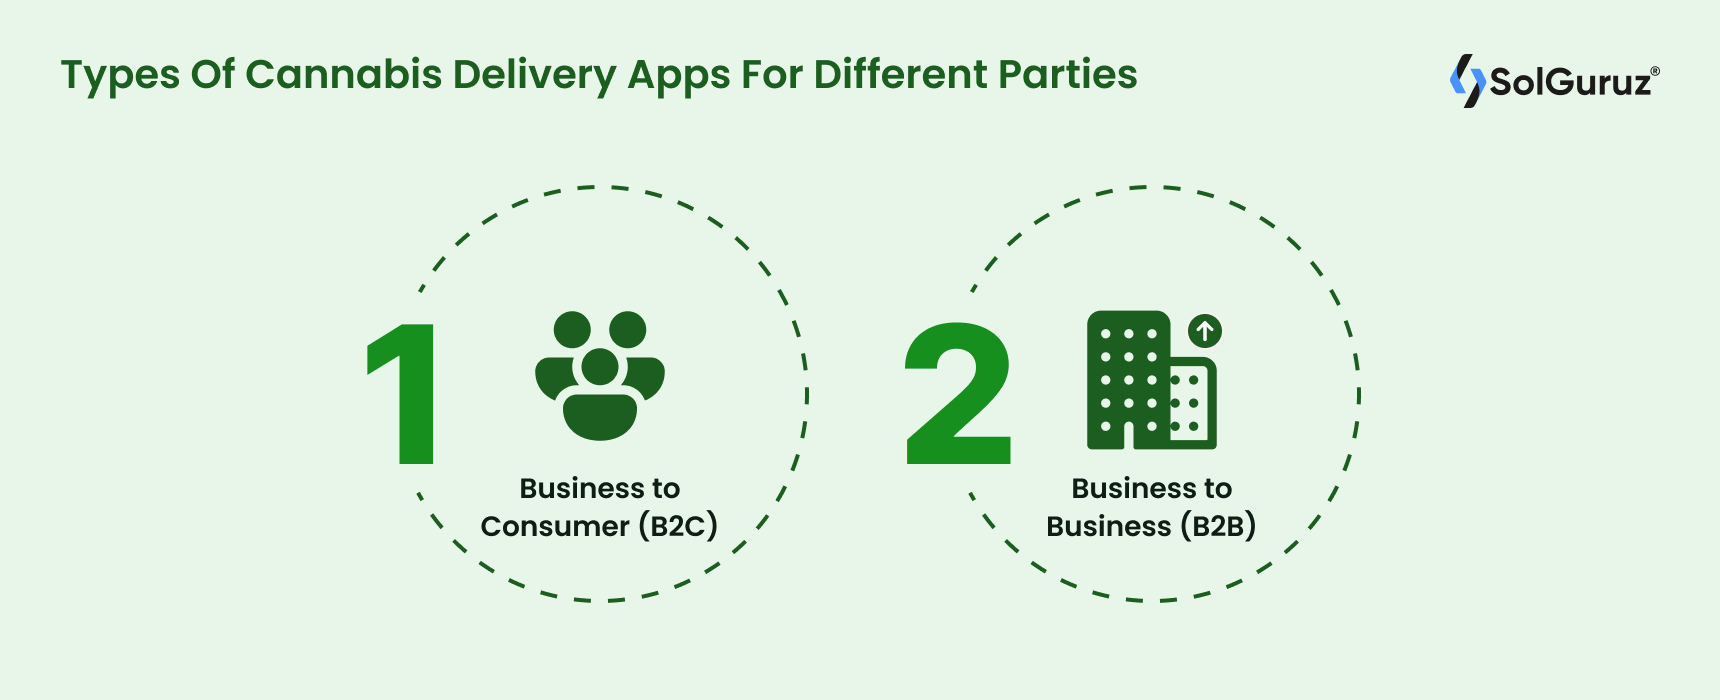 Types Of Cannabis Delivery Apps For Different Parties